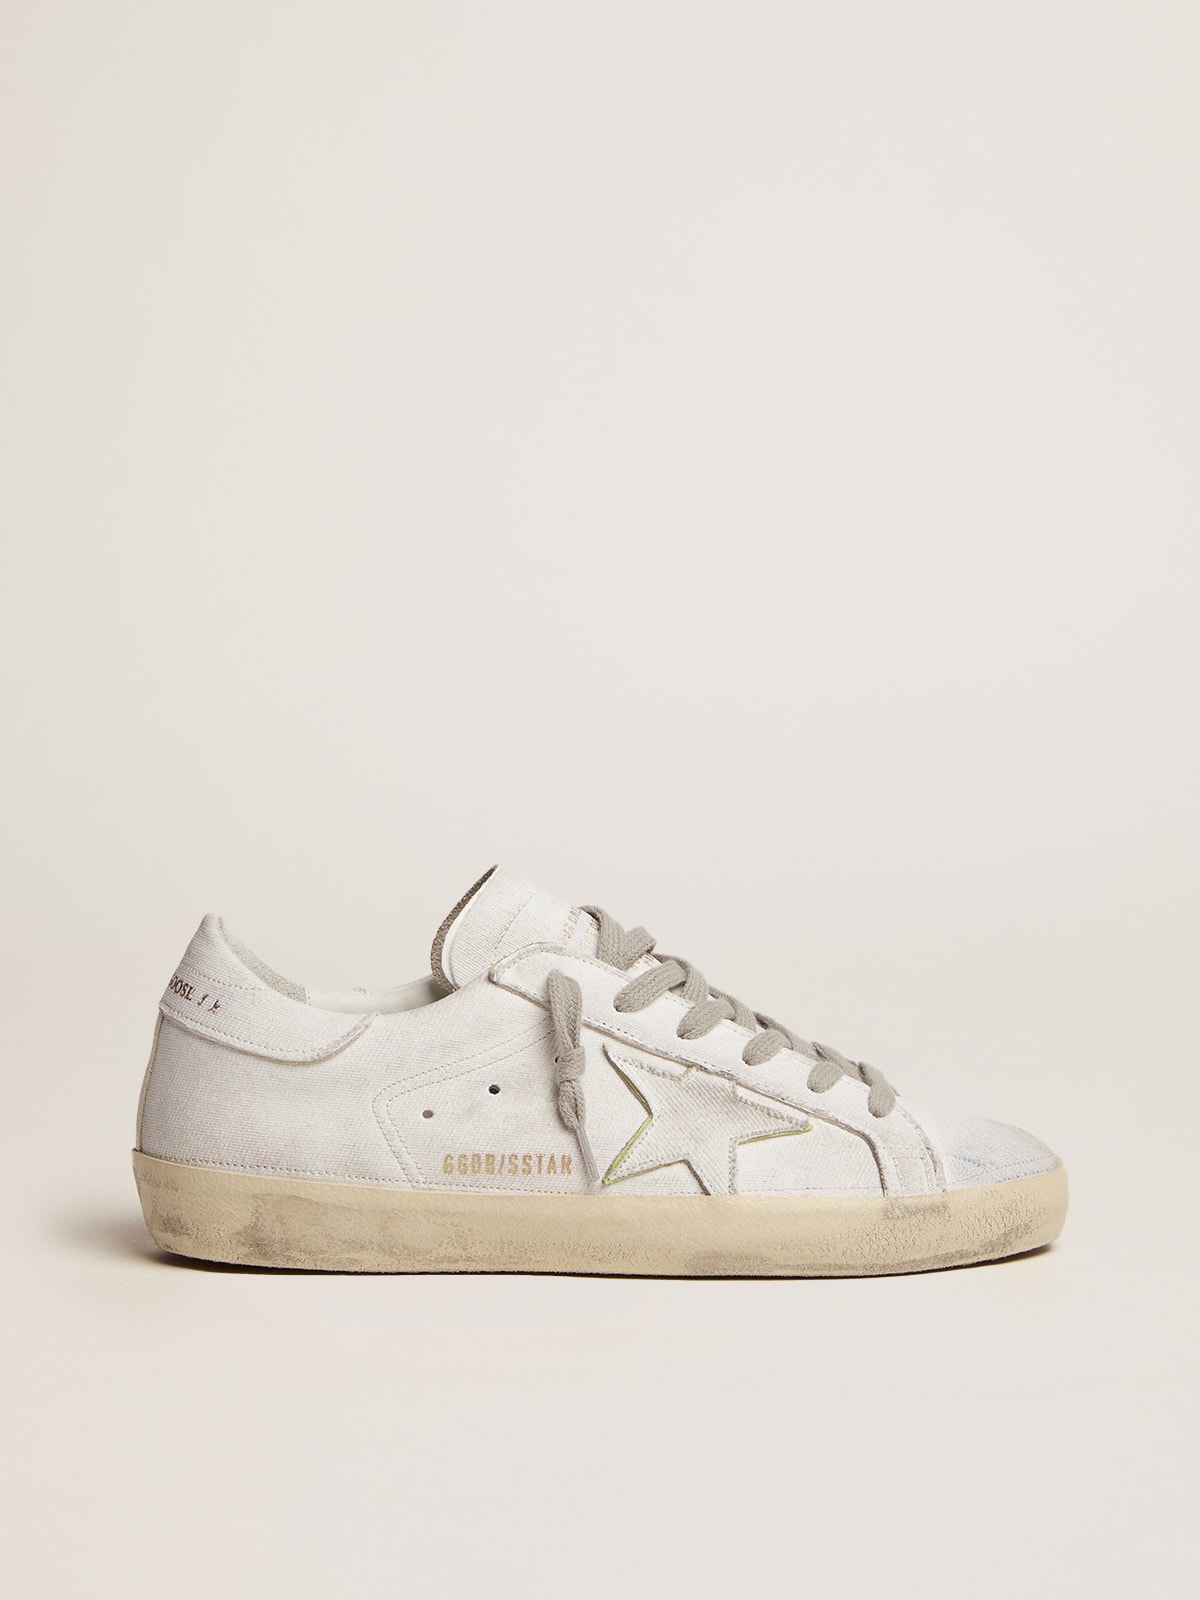 Golden Goose - Super-Star Dream Maker sneakers in white color with reverse construction and hidden multicolor details in 